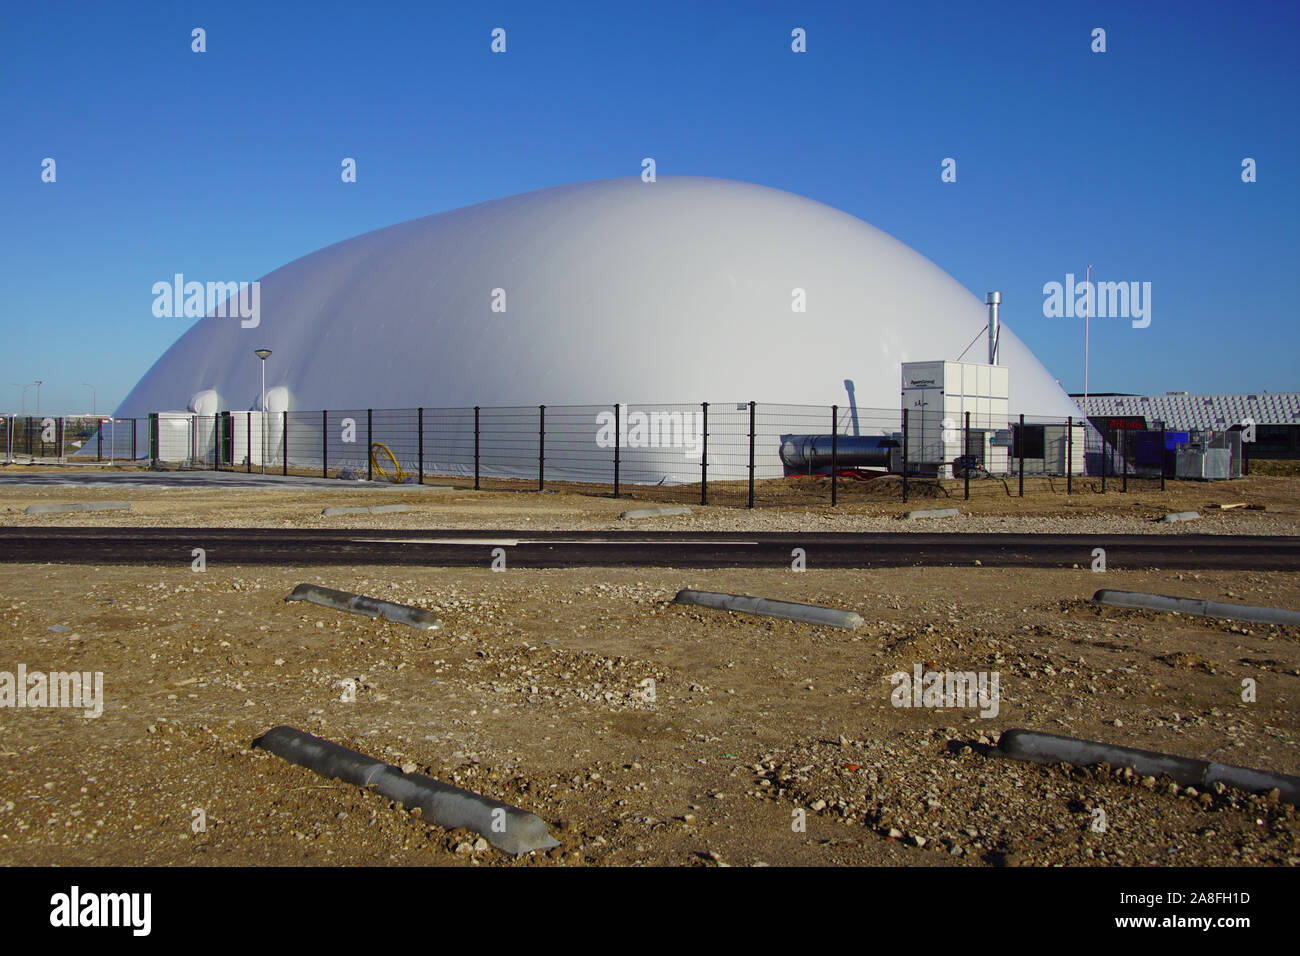 Almere Poort, the Netherlands - November 8, 2019: Inflatable dome sports hall against a clear blue sky. Stock Photo